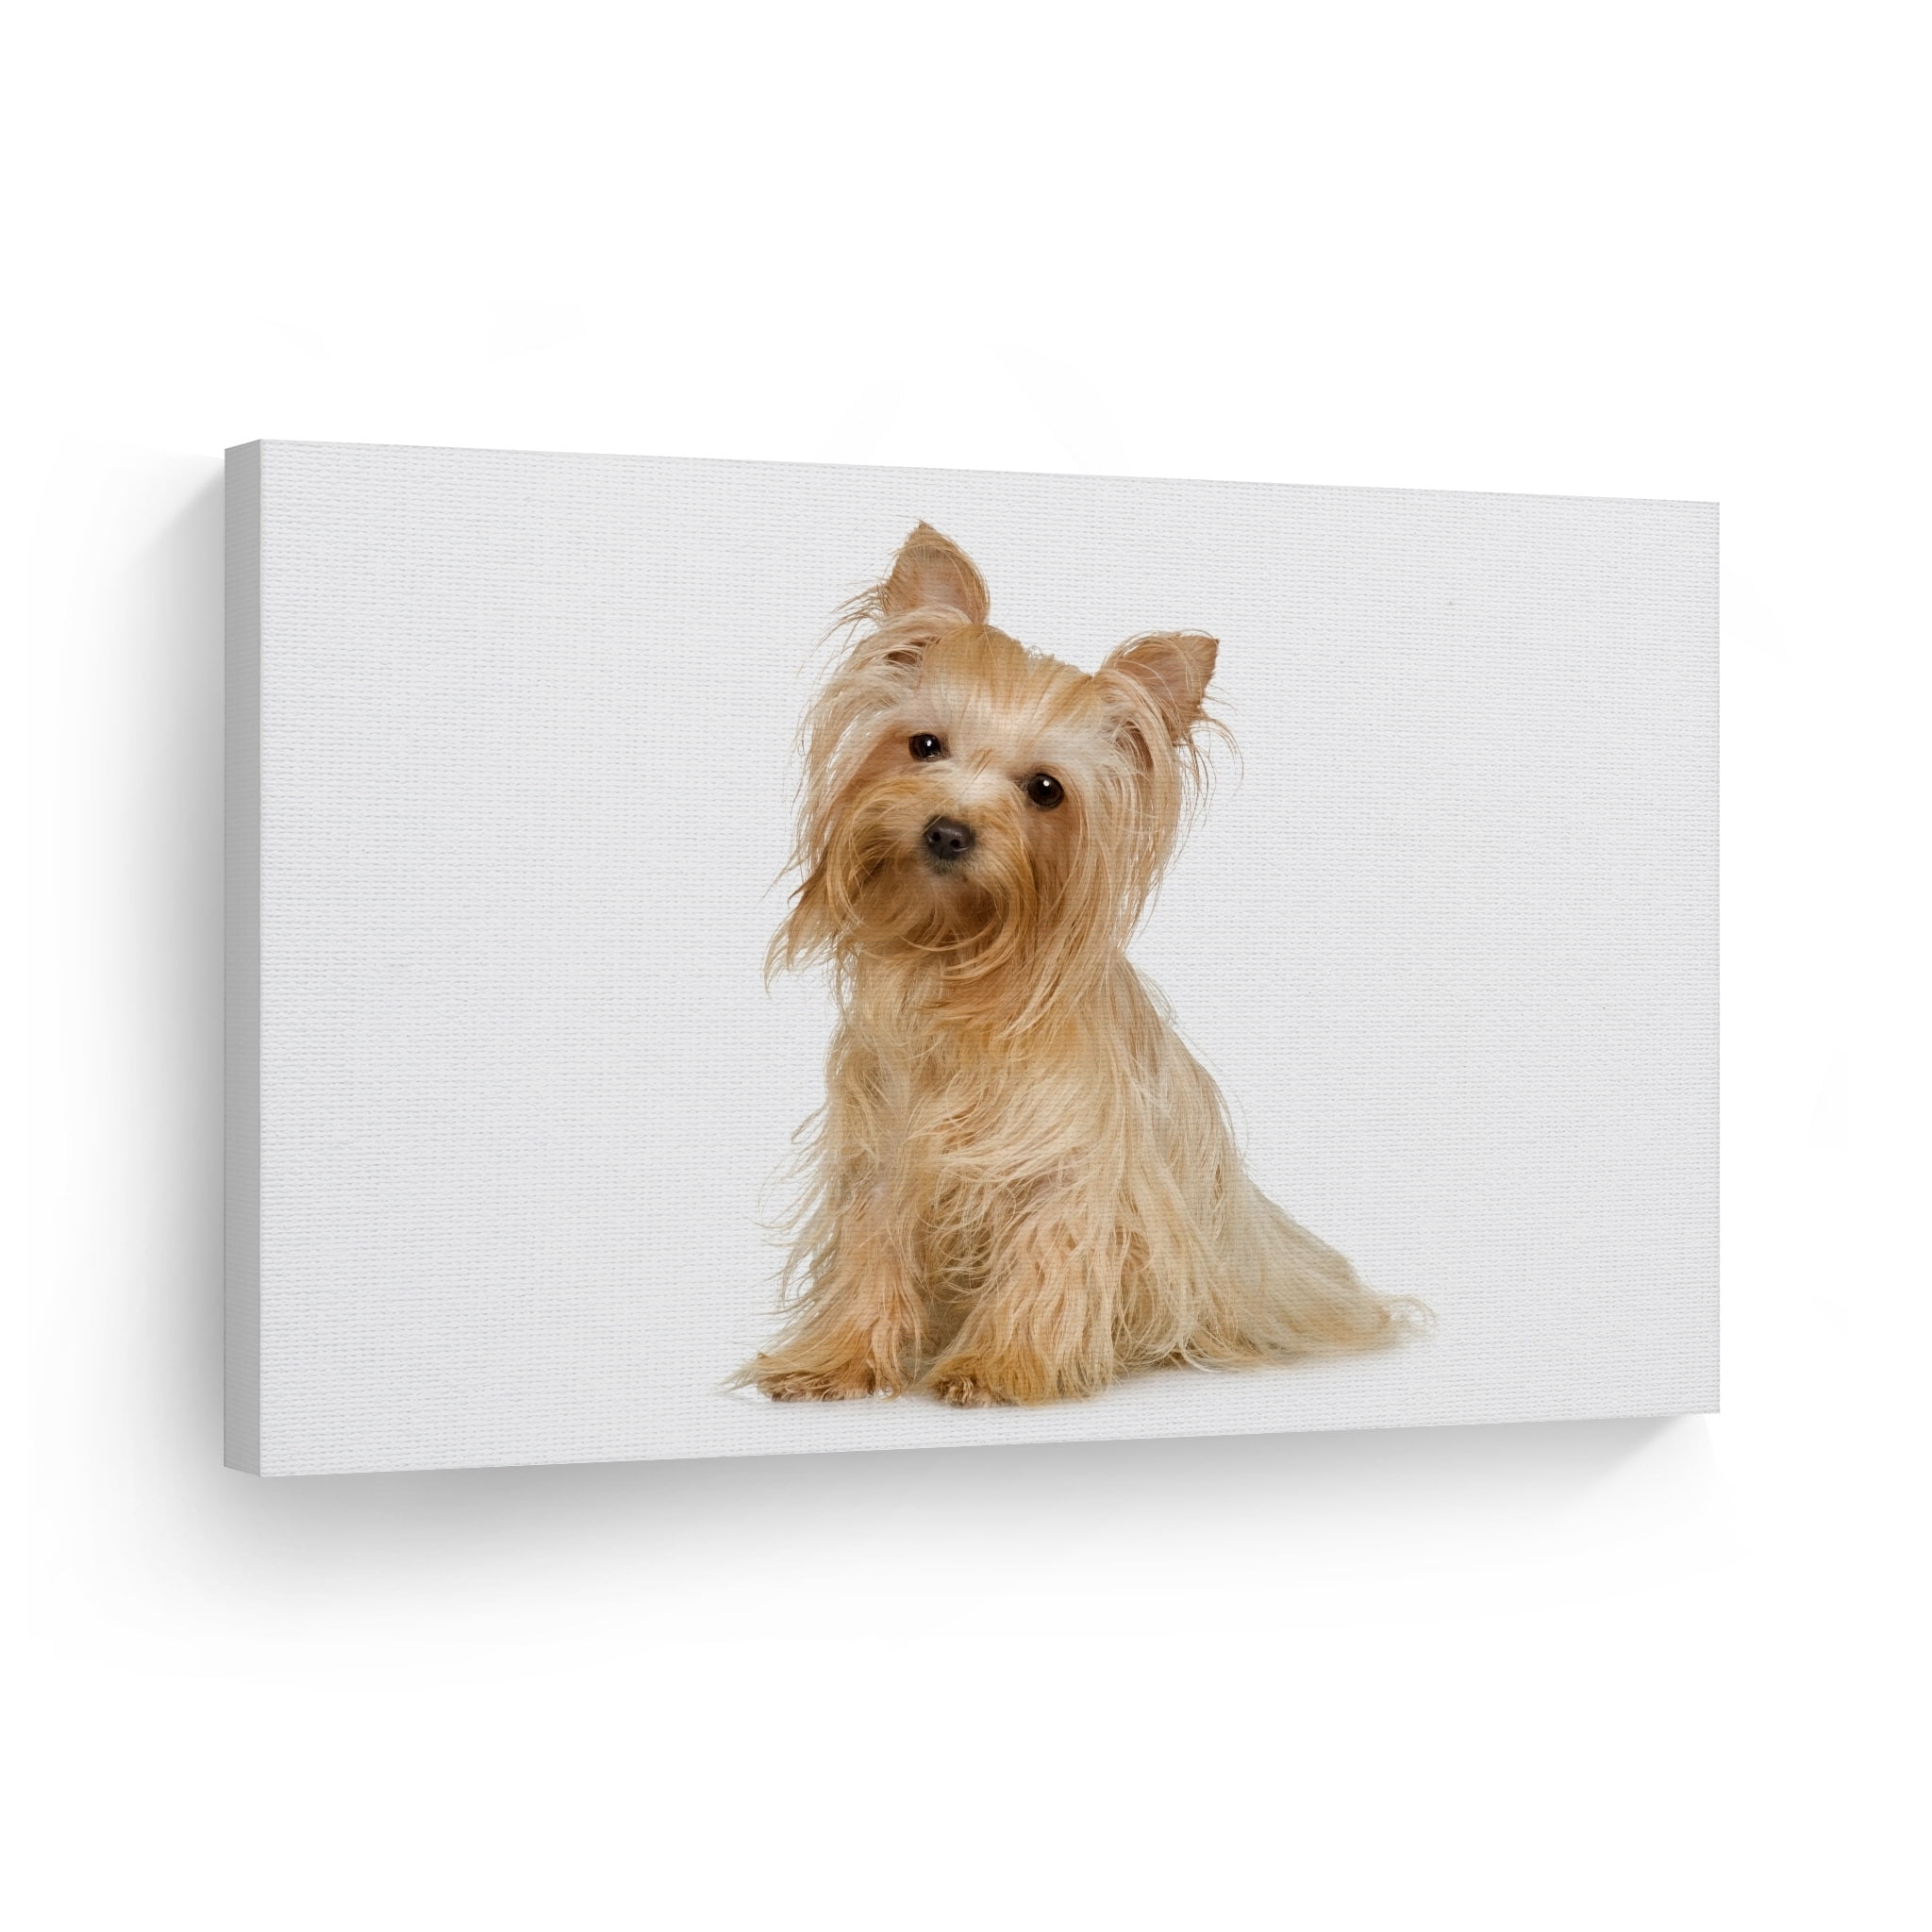 New & Boxed. Yorkie Yorkshire Terrier Dog Wall Clock 